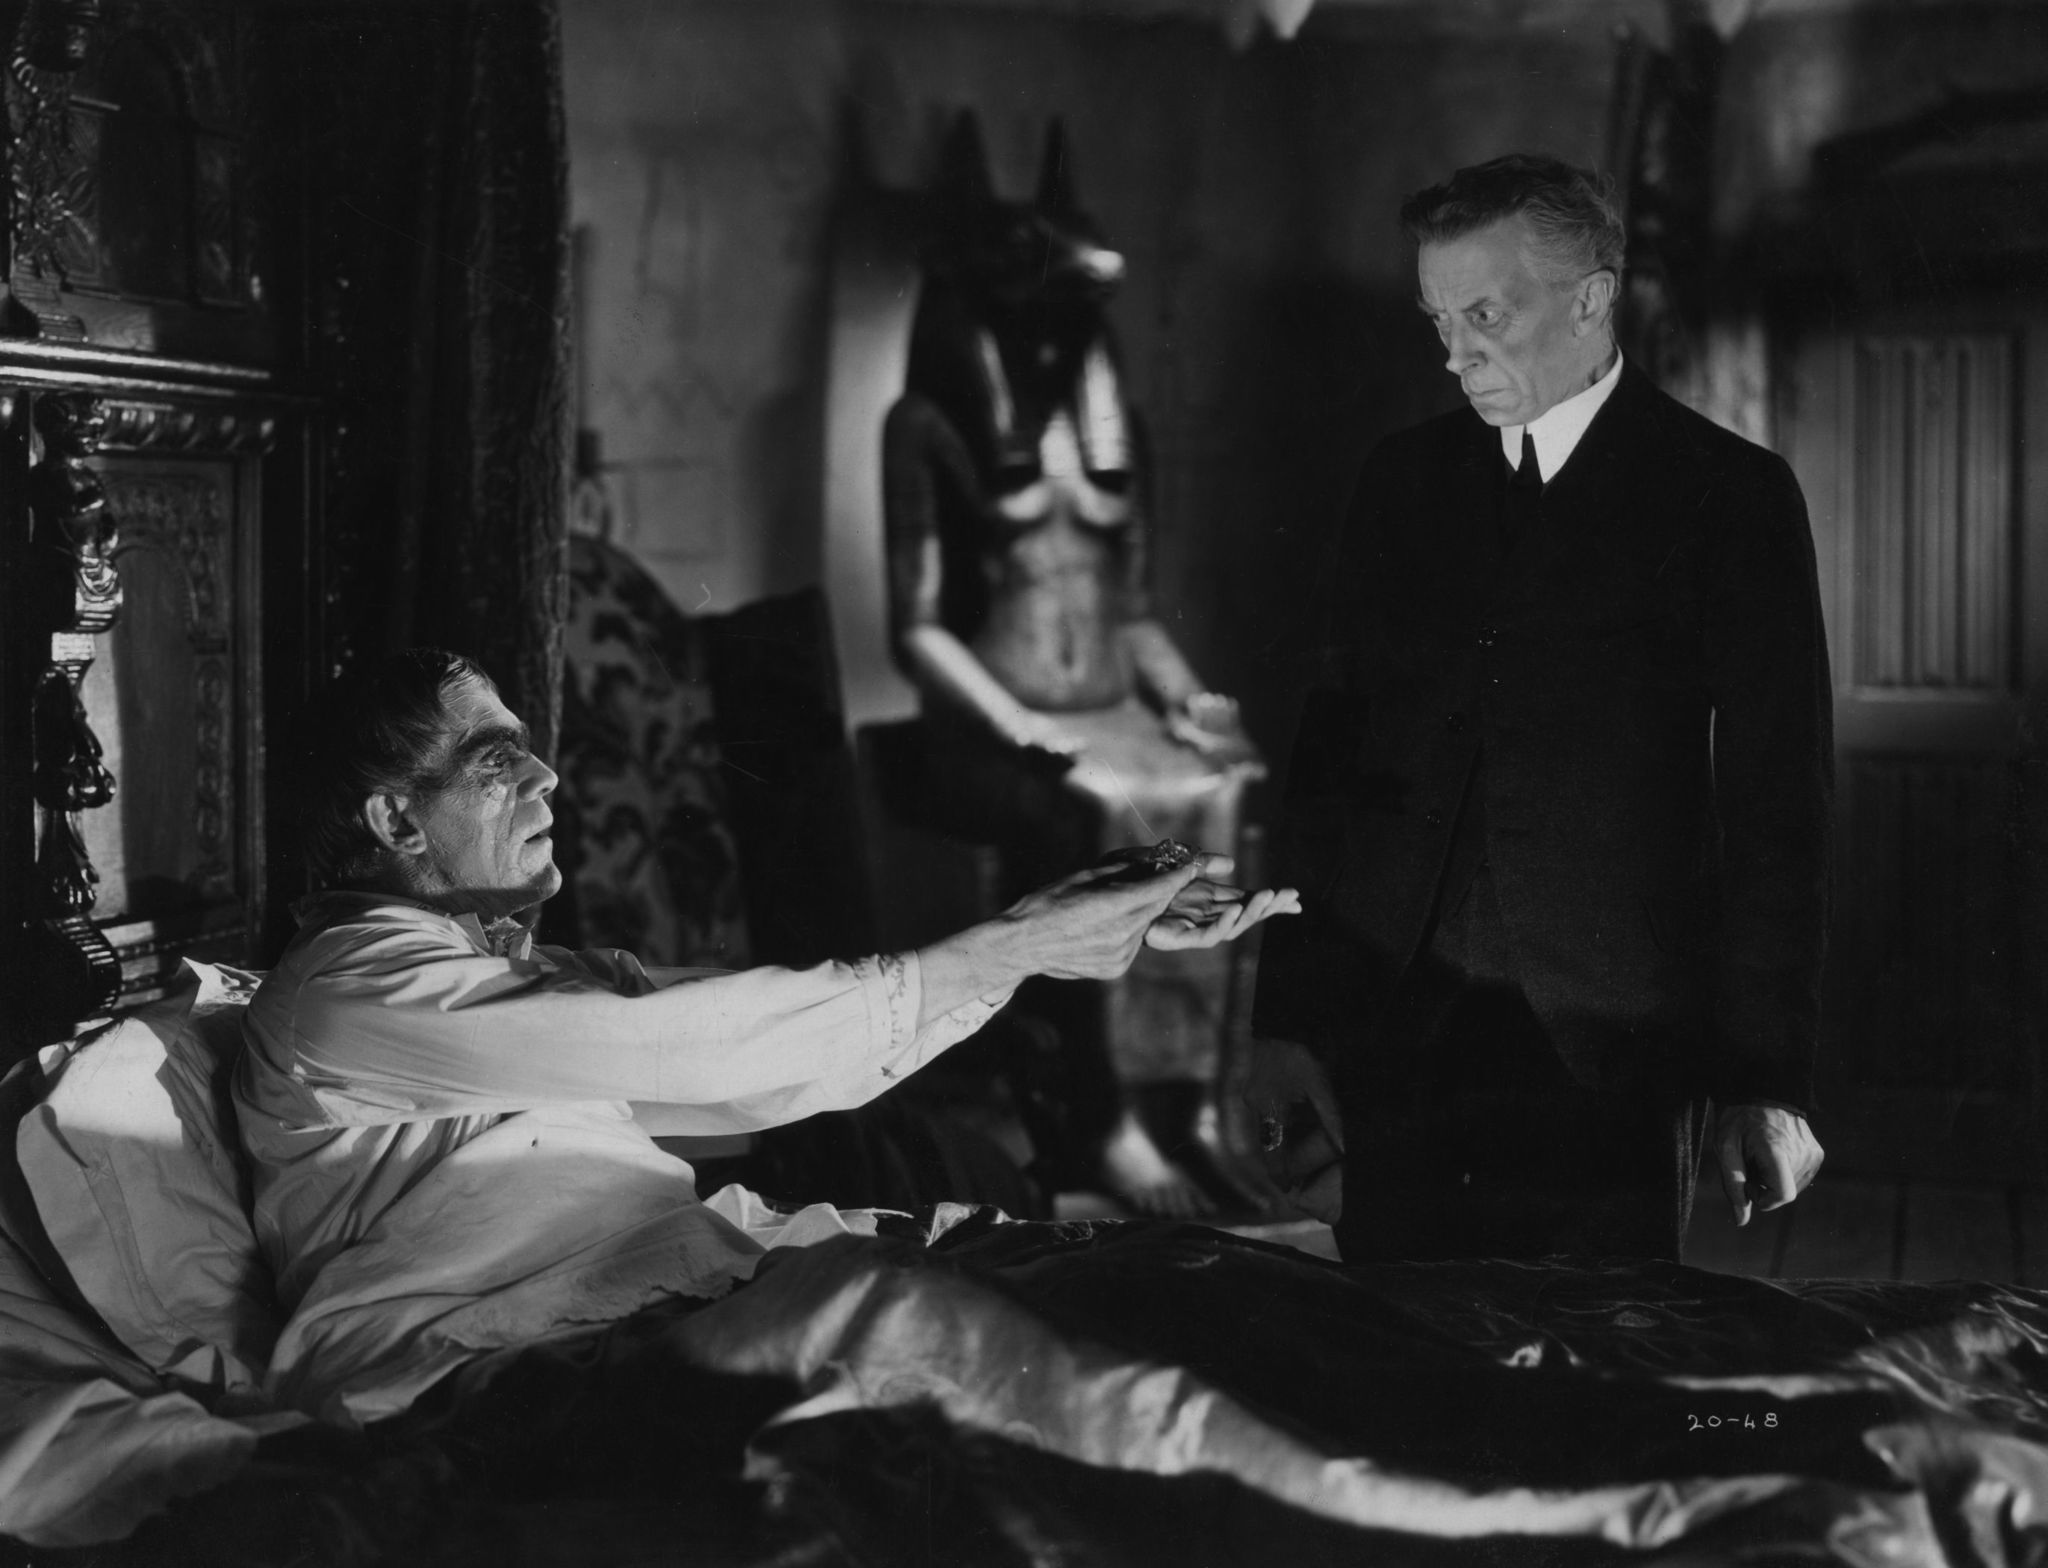 Boris Karloff and Ernest Thesiger at event of The Ghoul (1933)